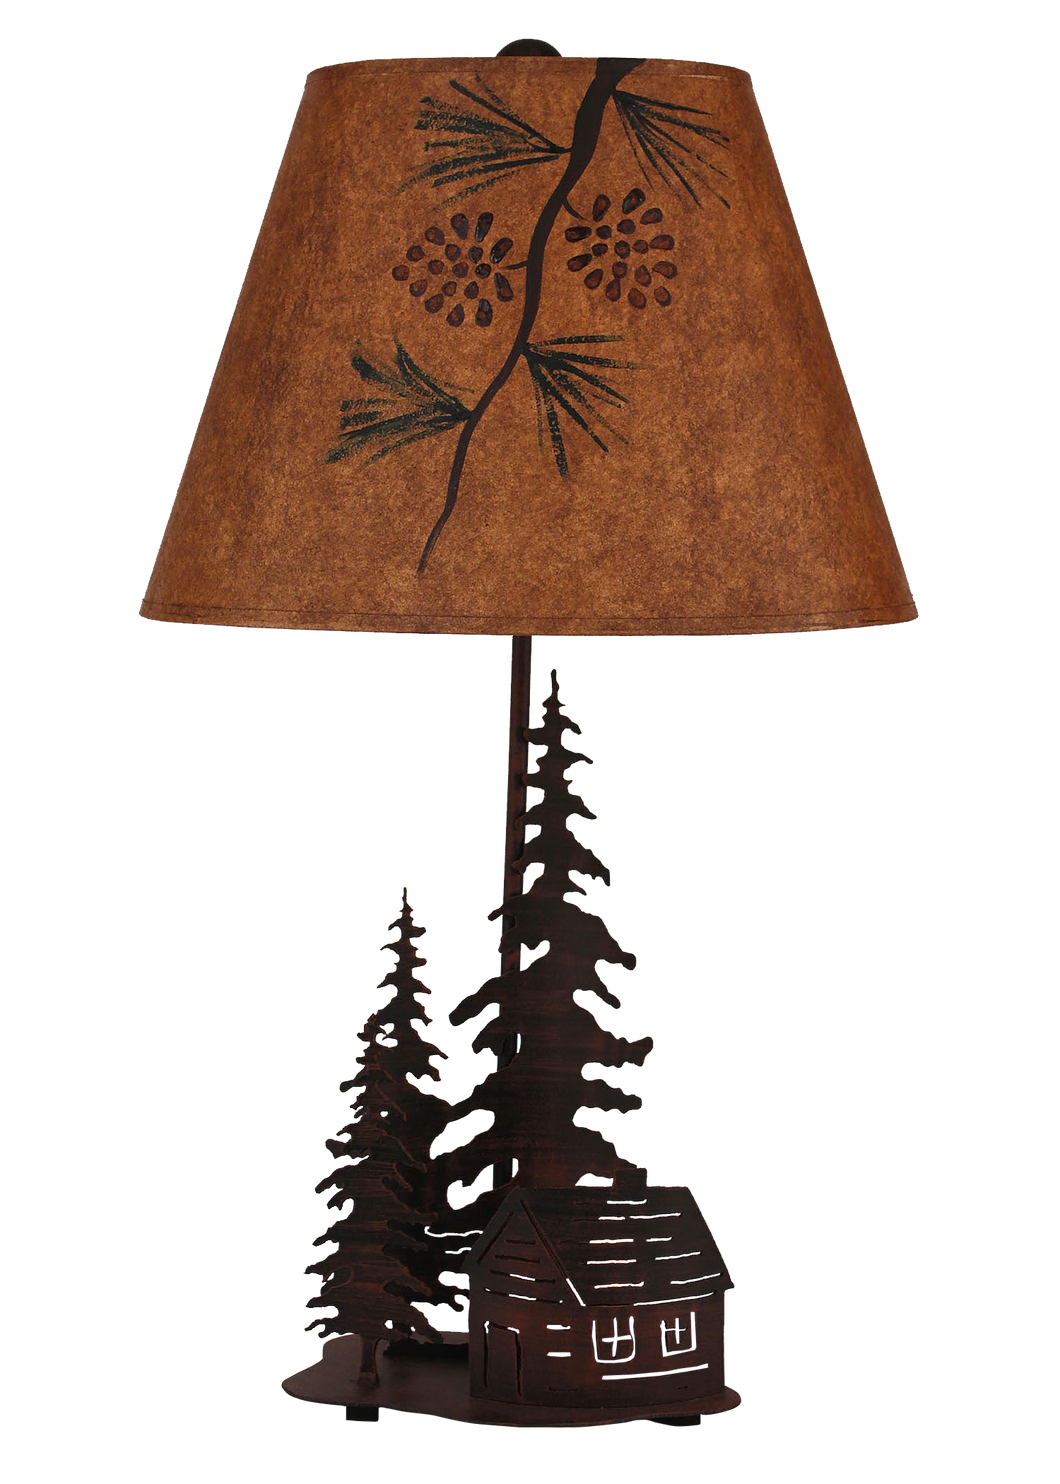 Burnt Sienna 2 Tree and Cabin Accent Lamp w/ Night Light